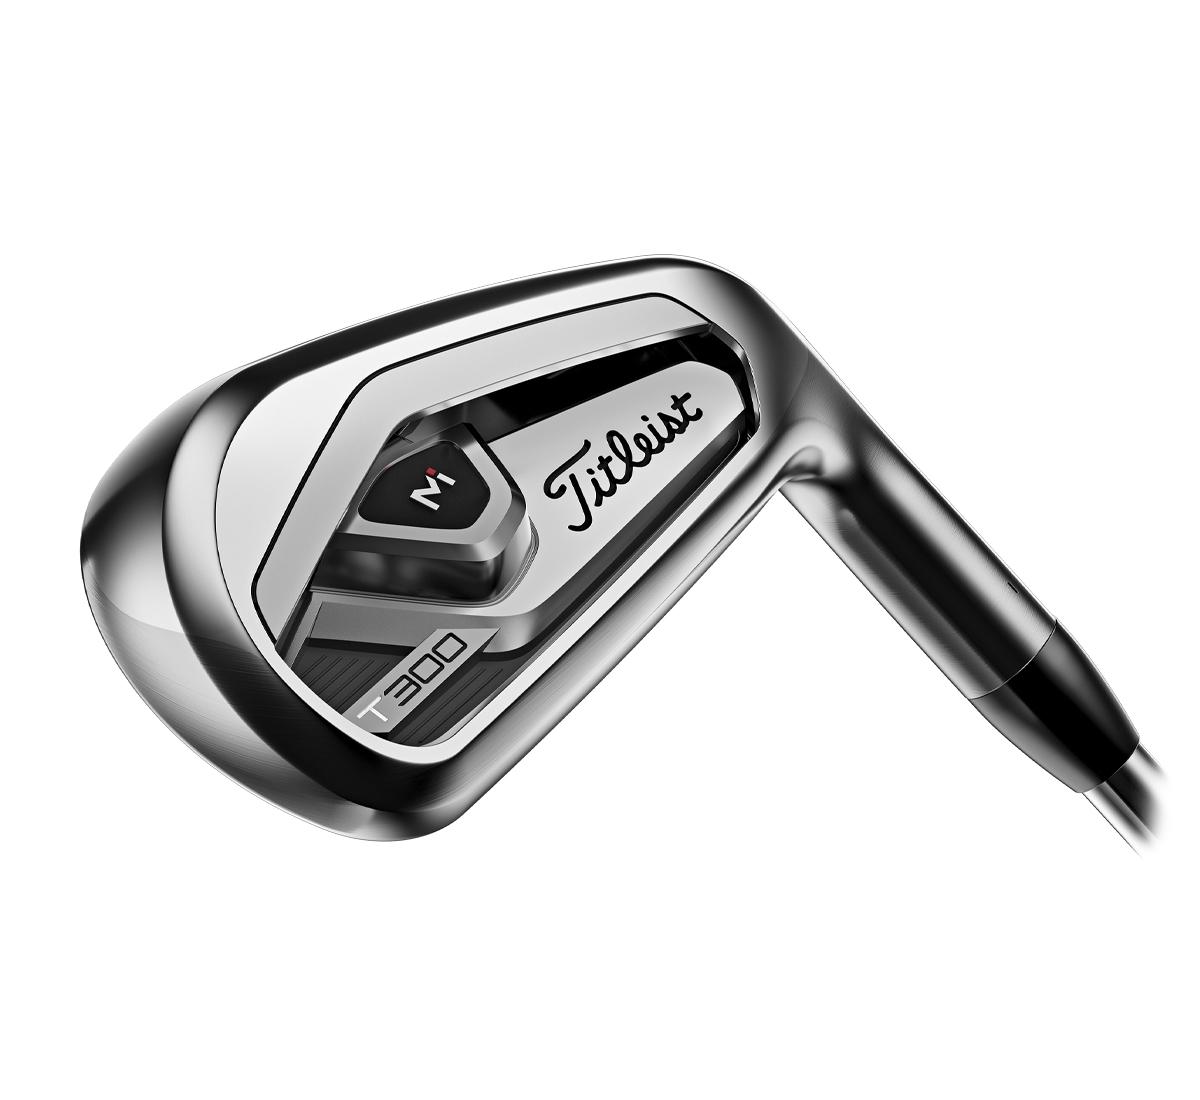 T300 Irons by Titleist